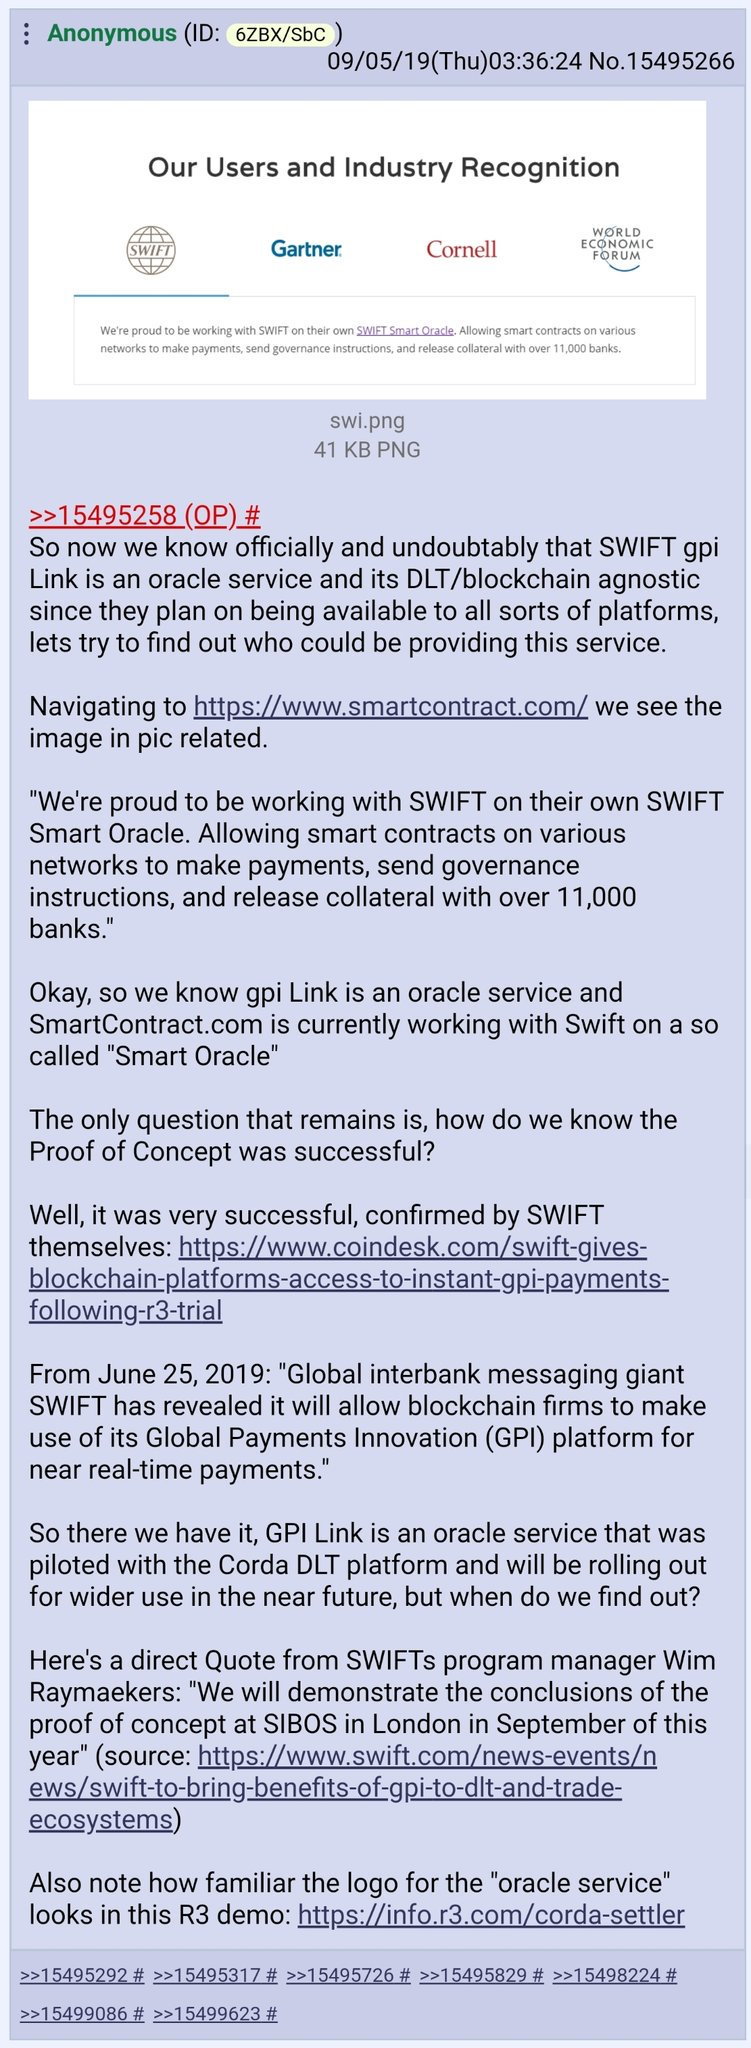 swift-connection-3